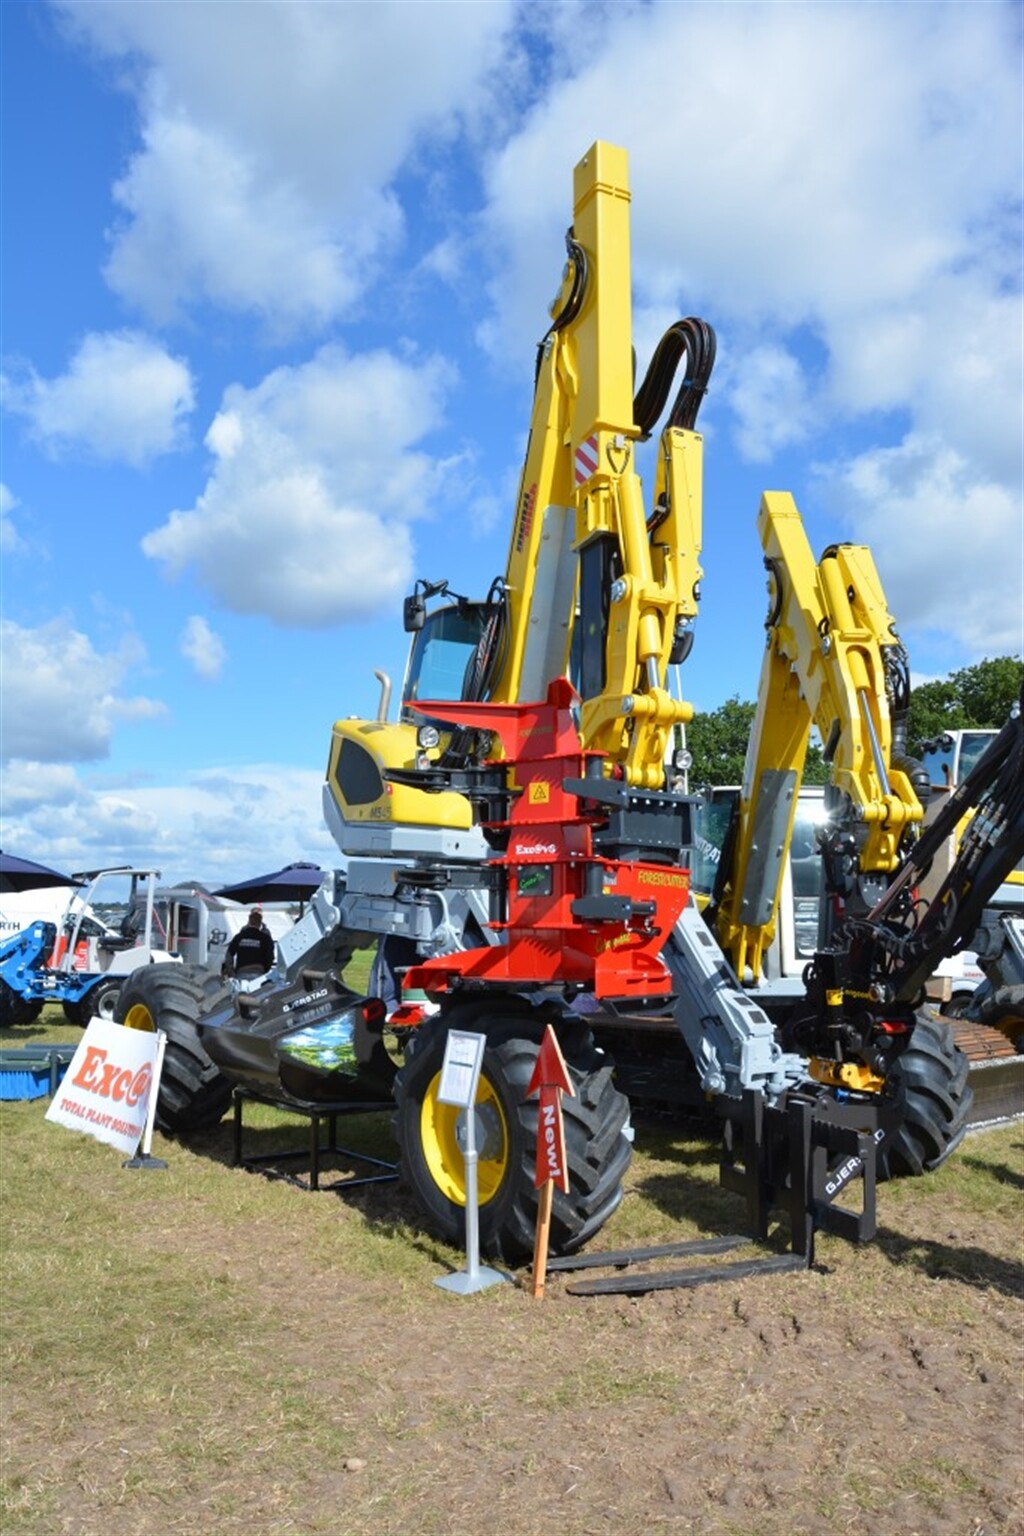 A day in the woods at the APF Forestry Show (Part Two)